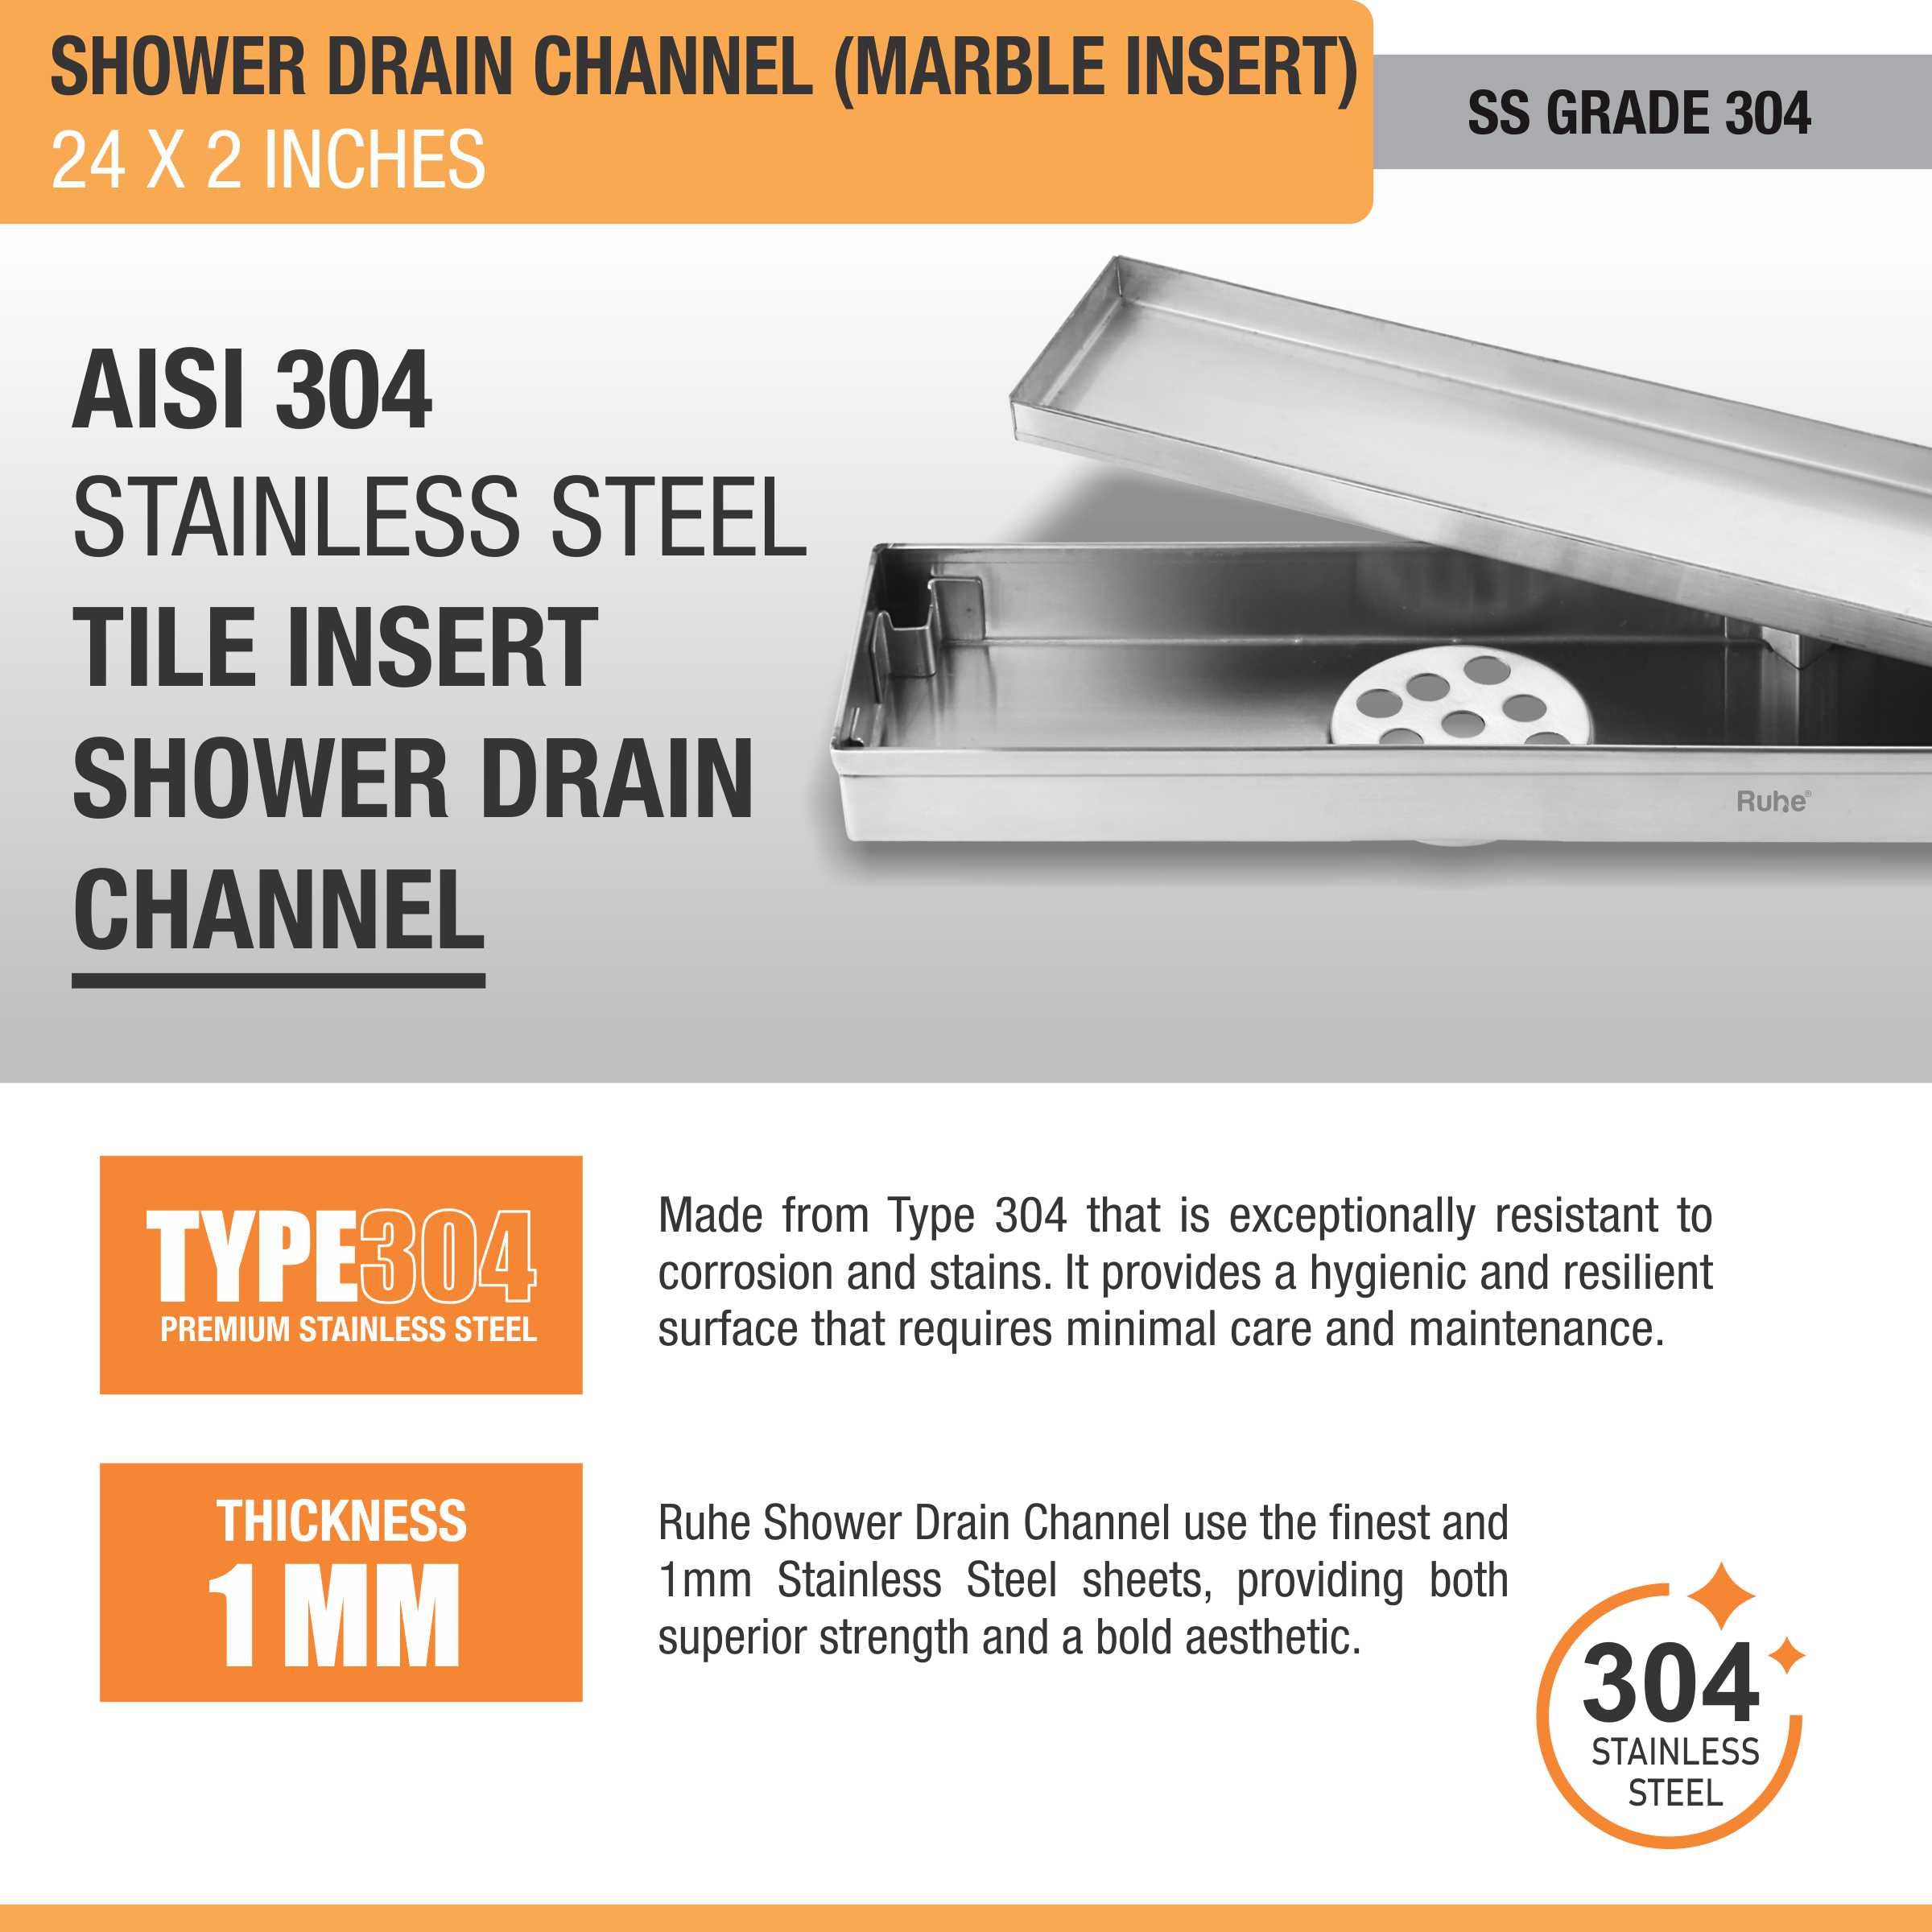 Marble Insert Shower Drain Channel (24 x 2 Inches) (304 Grade) stainless steel